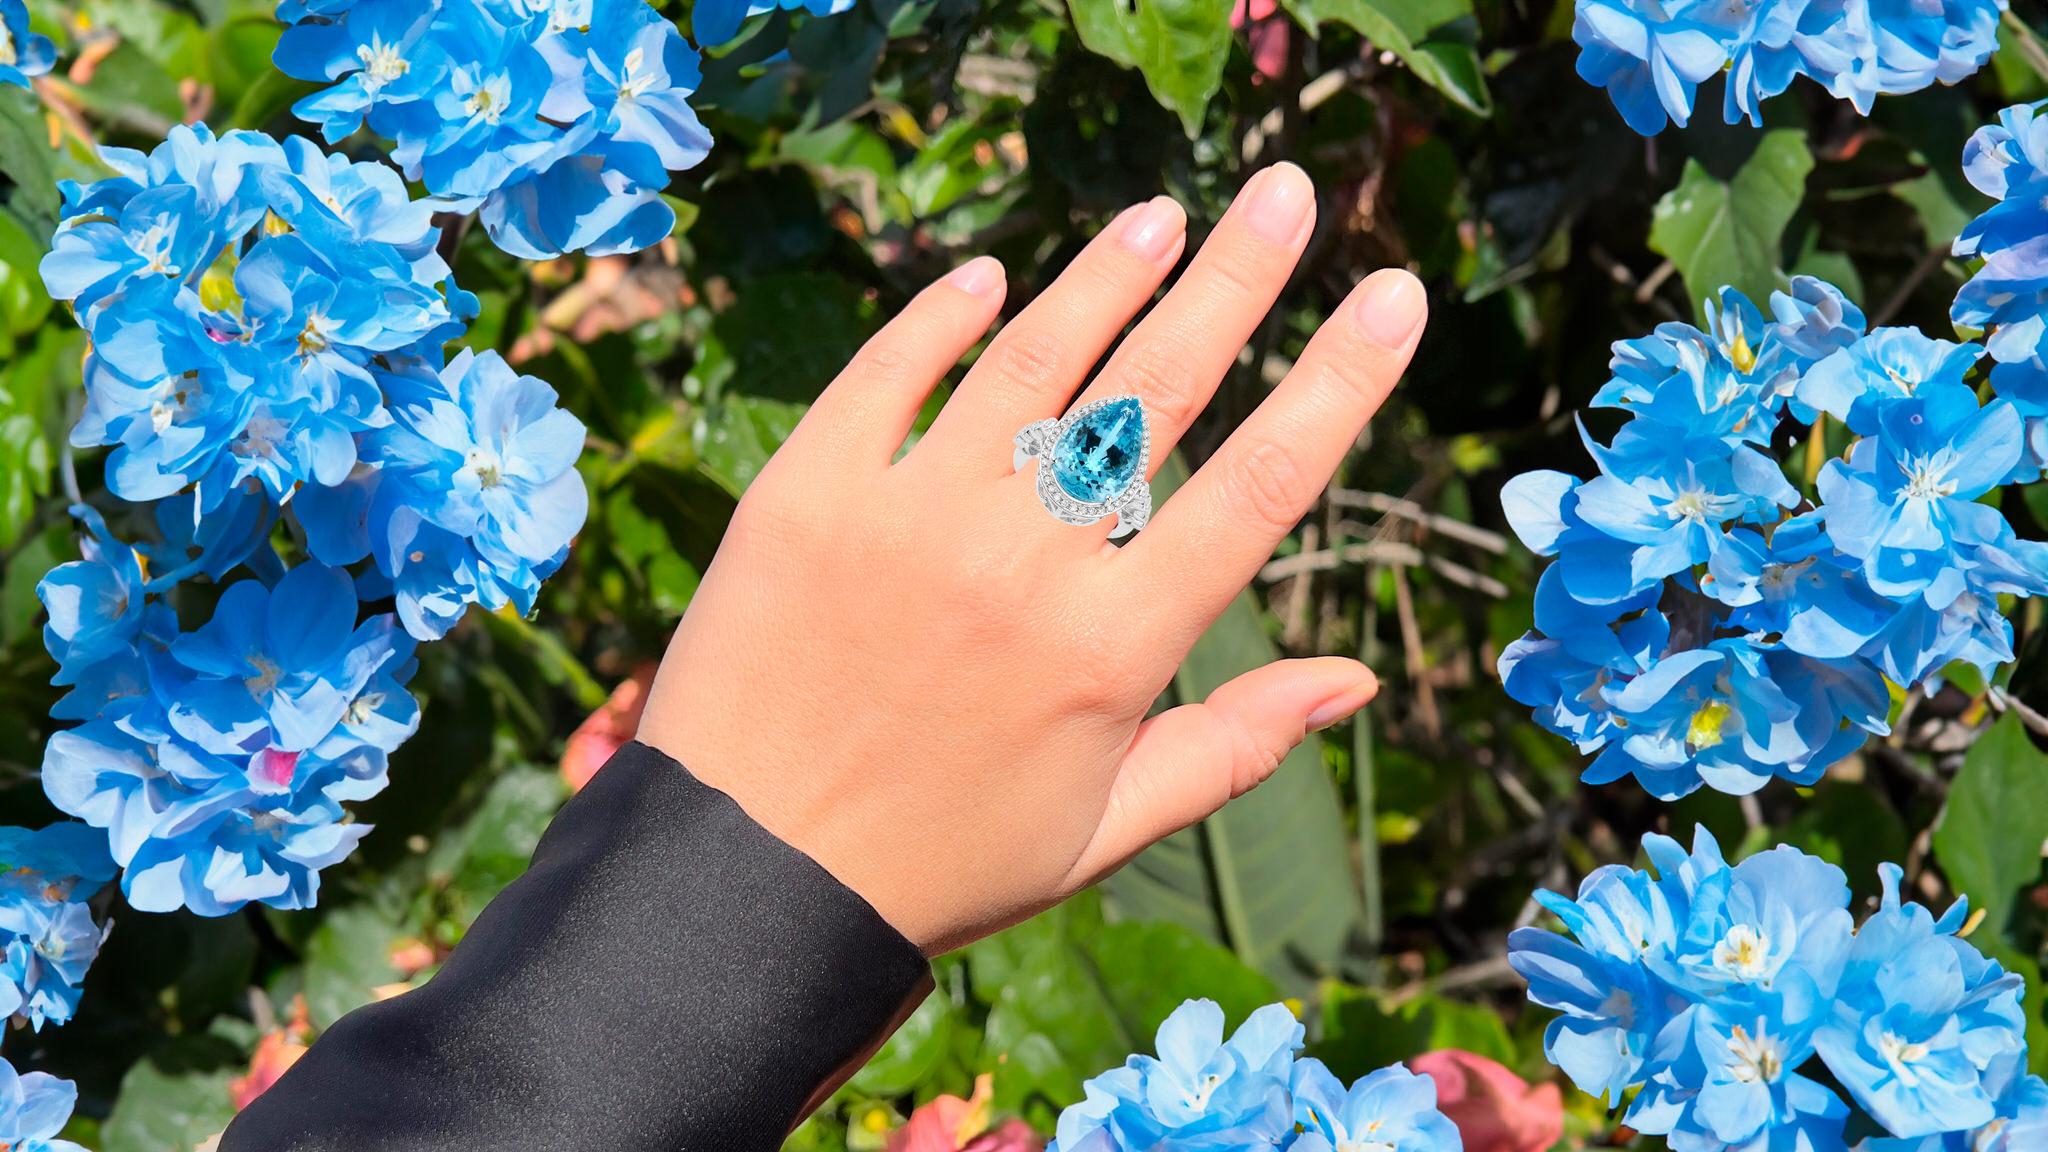 It comes with the Gemological Appraisal by GIA GG/AJP
All Gemstones are Natural
Pear Aquamarine = 12.84 Carat
46 Round Diamonds = 0.58 Carats
Metal: 14K White Gold
Ring Size: 7* US
*It can be resized complimentary